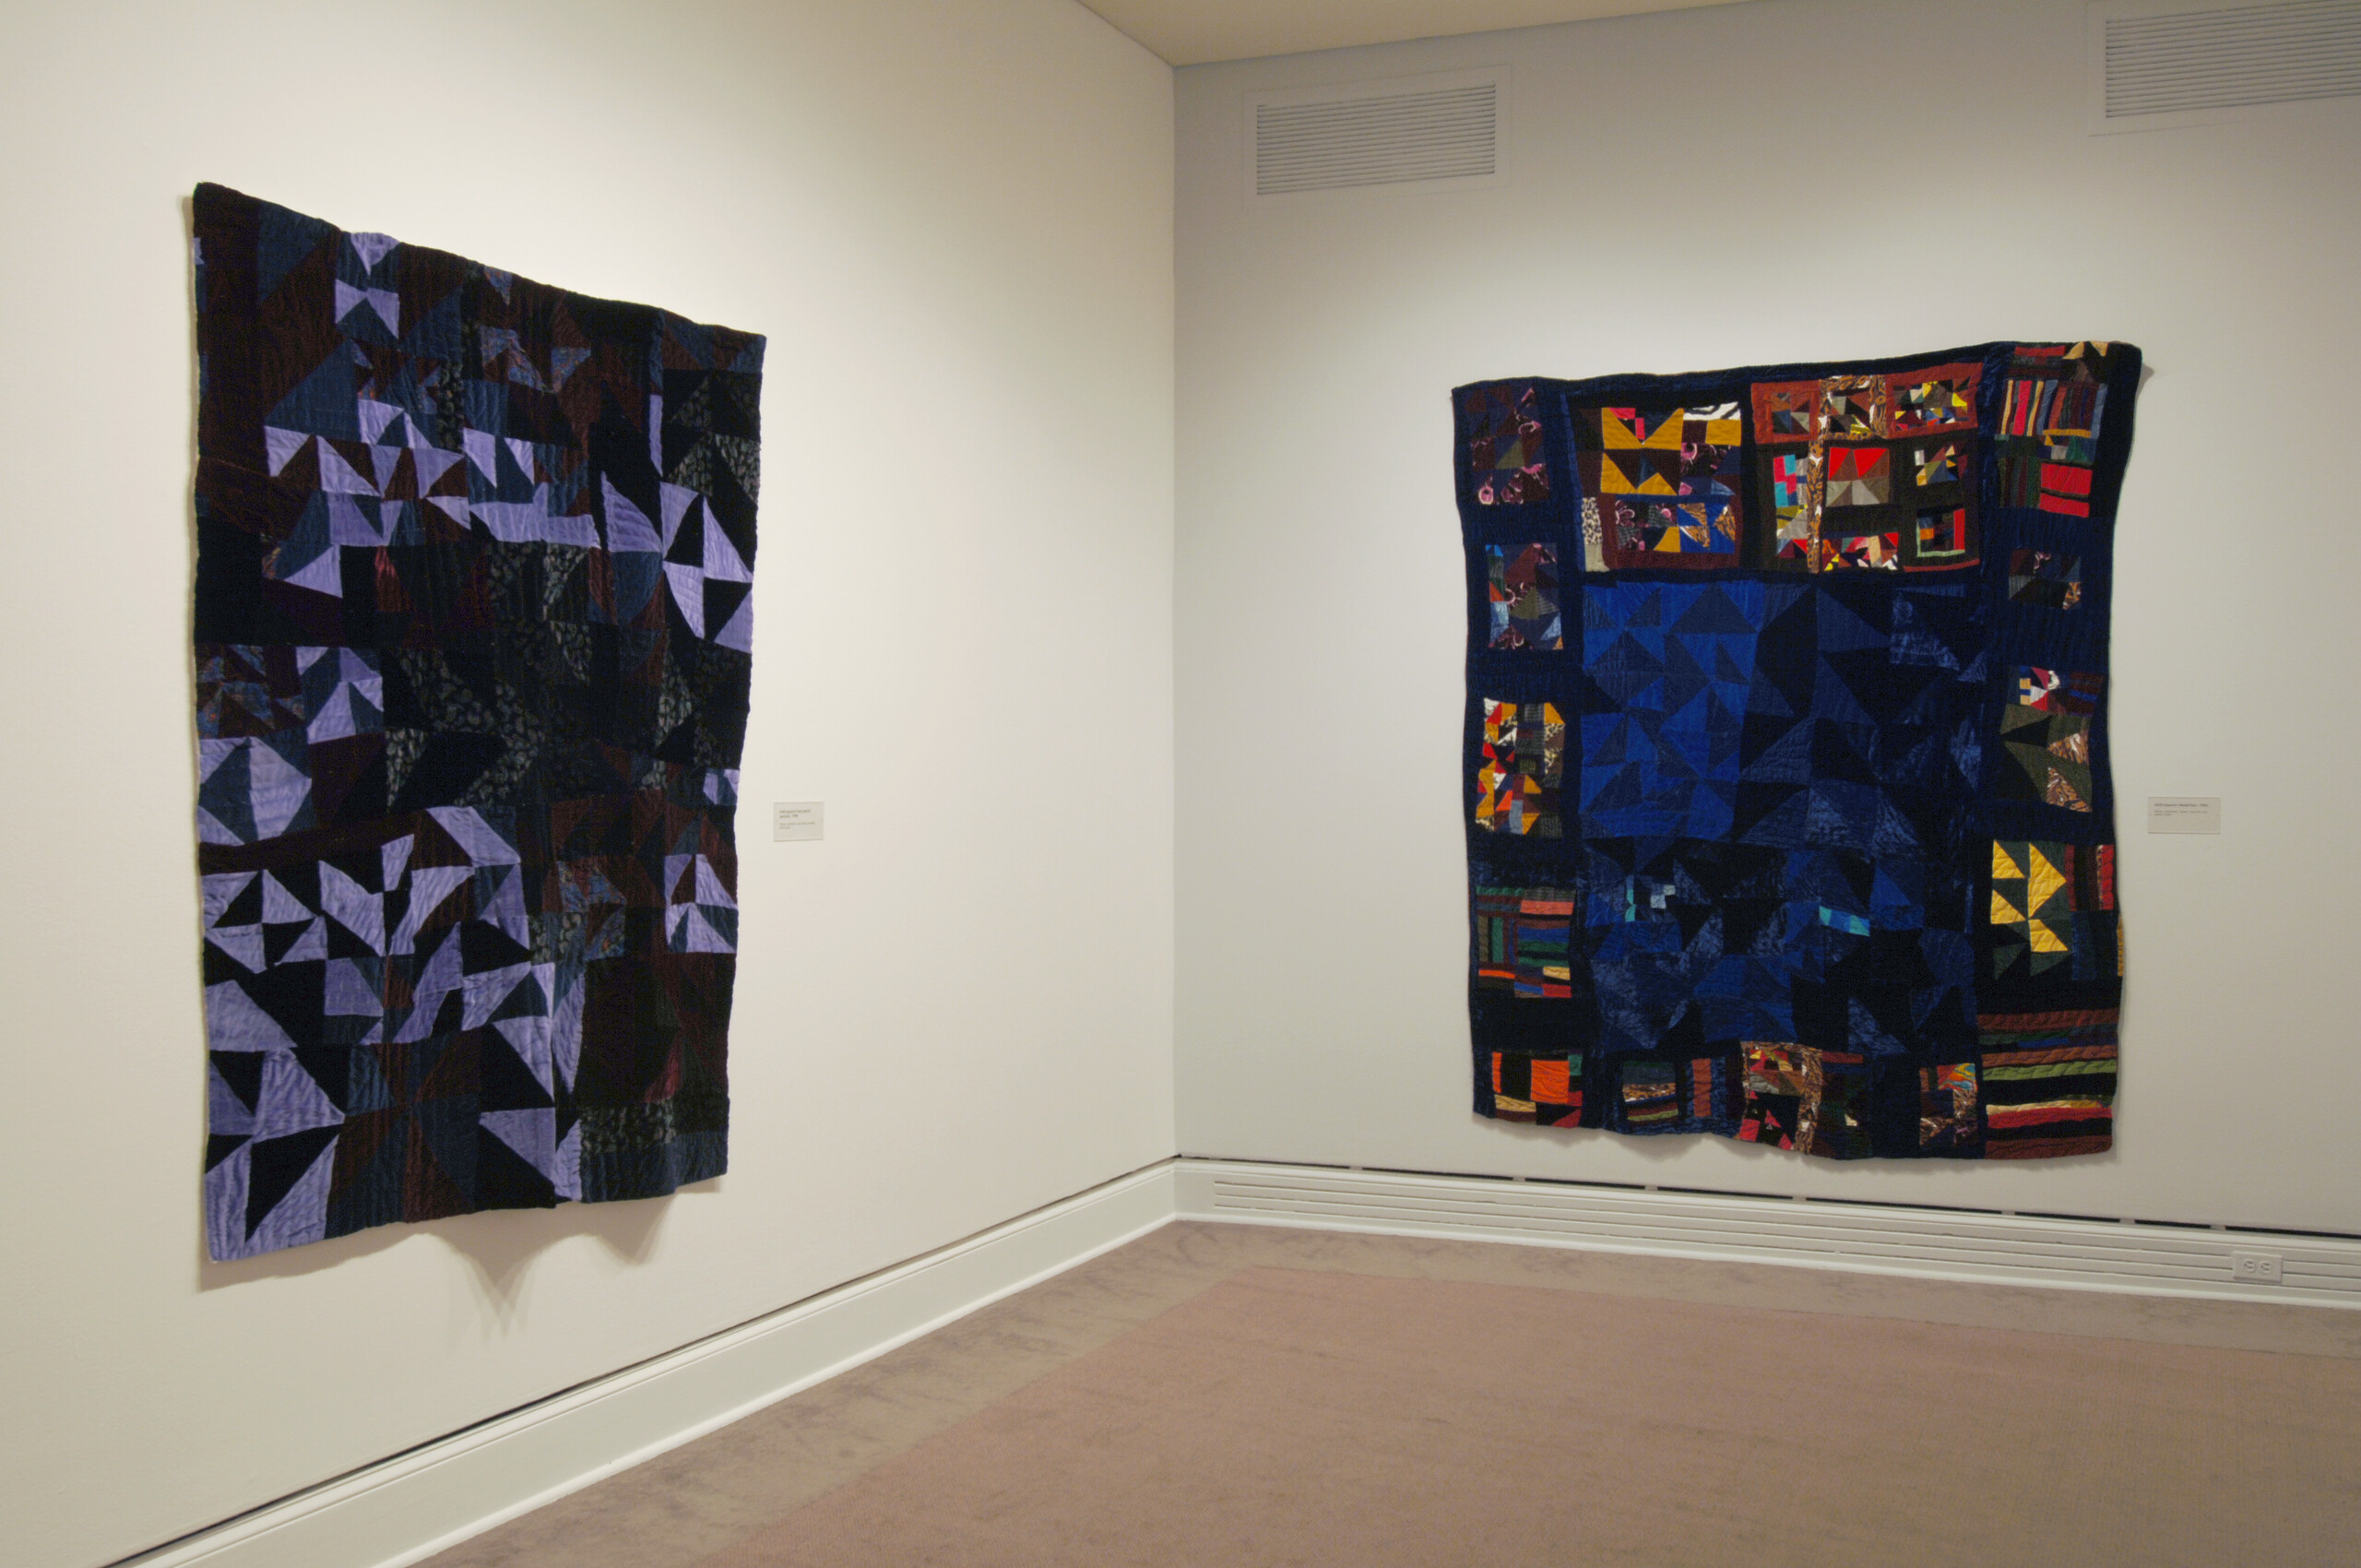 An installation view of a gallery space shows two large quilts hanging on a white wall. The quilts have an abstract pattern and have dark colors, especially the dark blue colors are prominent, creating a feeling of nighttime.